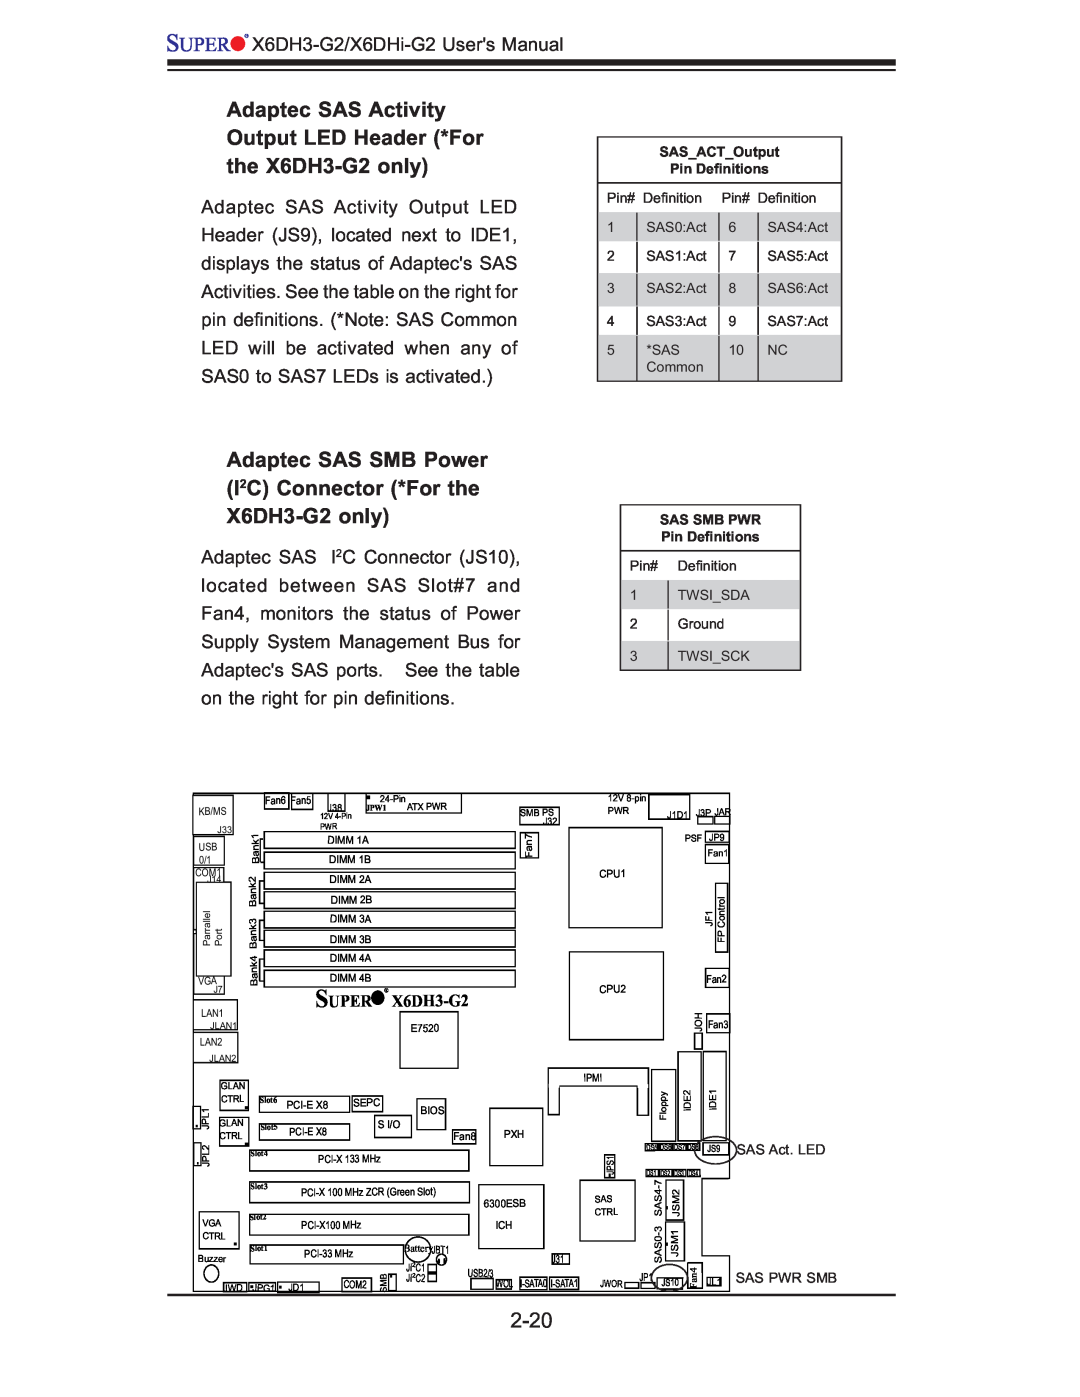 SUPER MICRO Computer X6DHi-G2 user manual Adaptec SAS Activity Output LED Header *For the X6DH3-G2 only, 2-20 